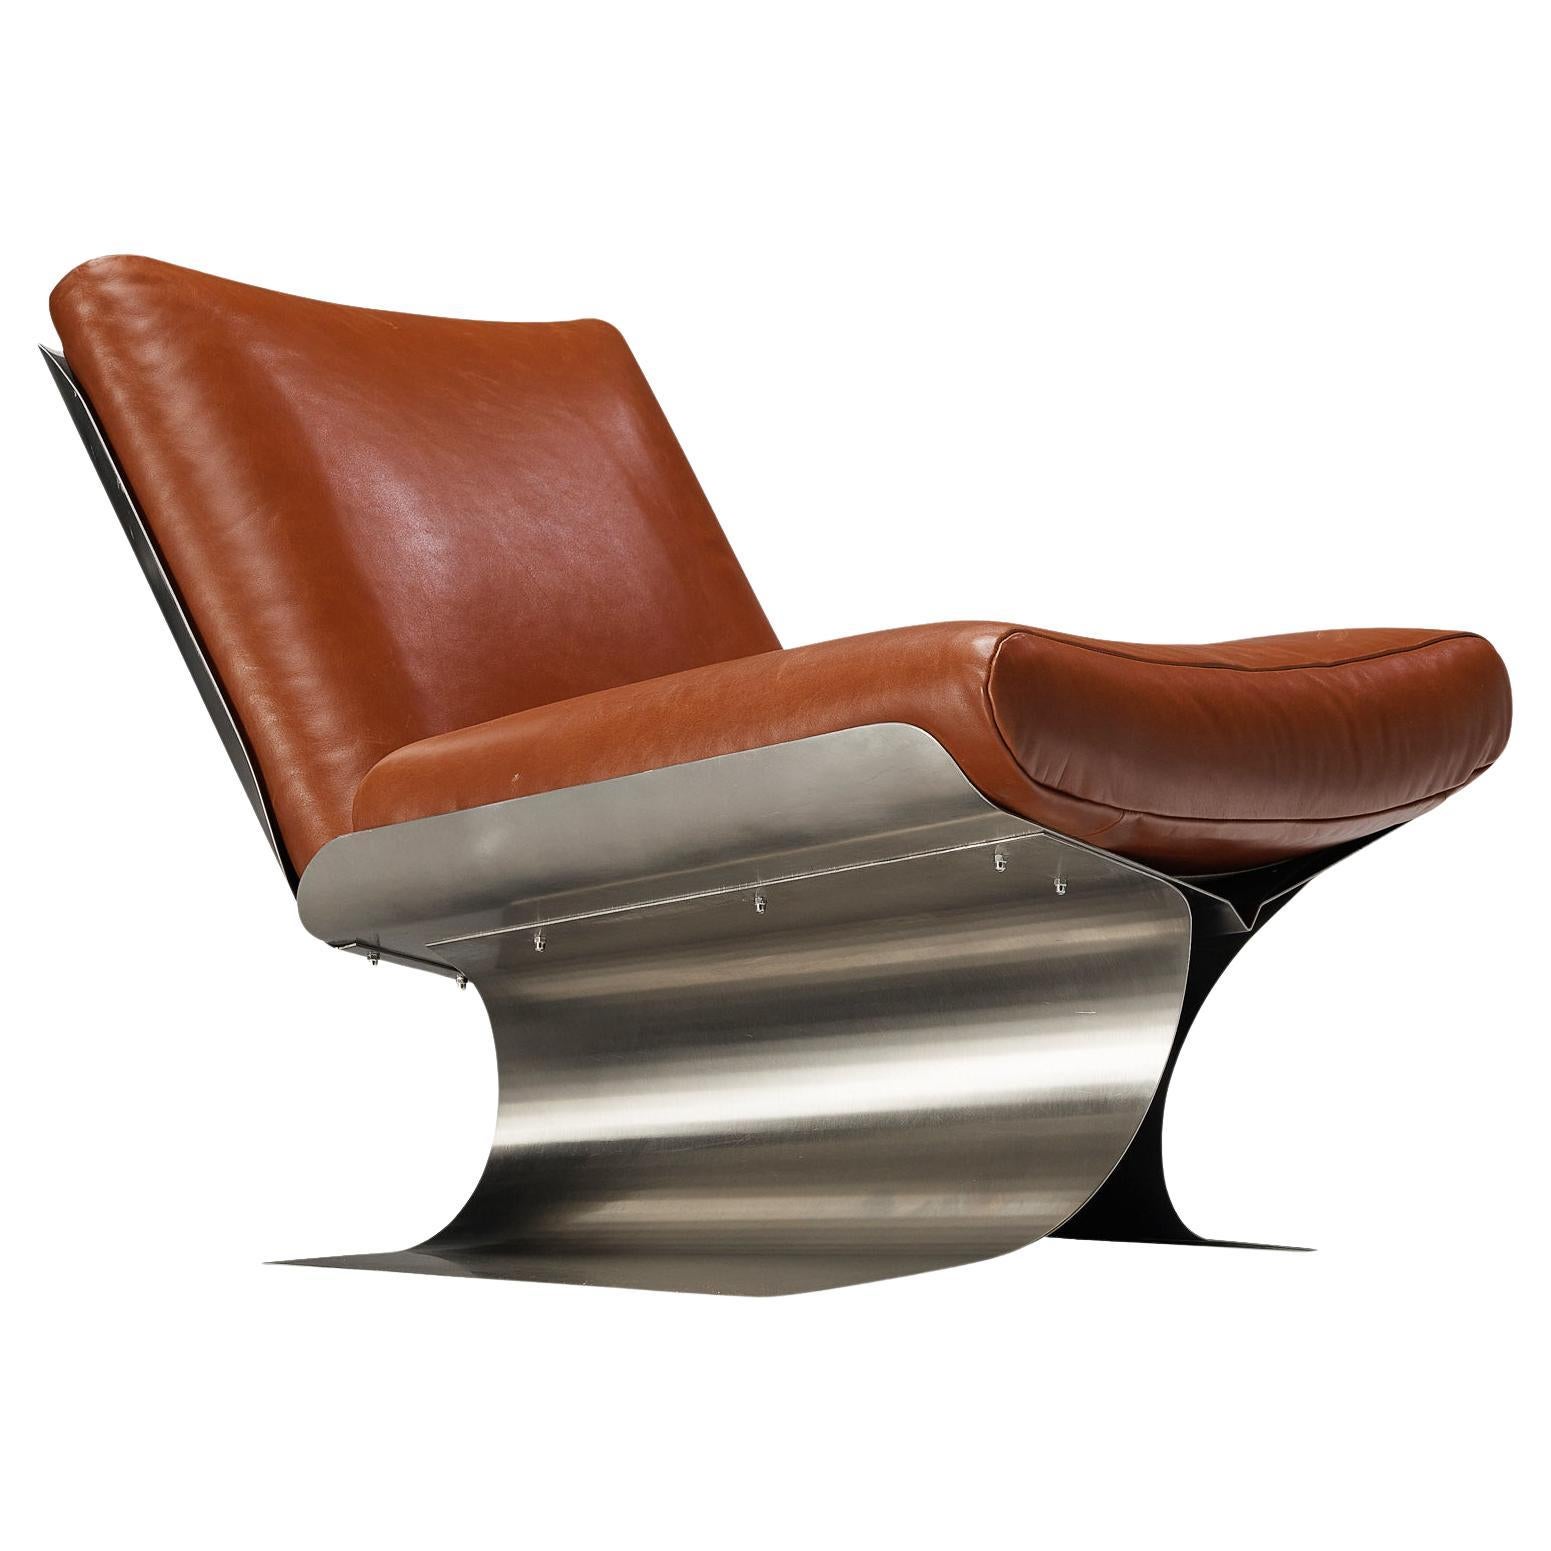 Rare Xavier Féal Lounge Chair in Brushed Steel and Cognac Leather 